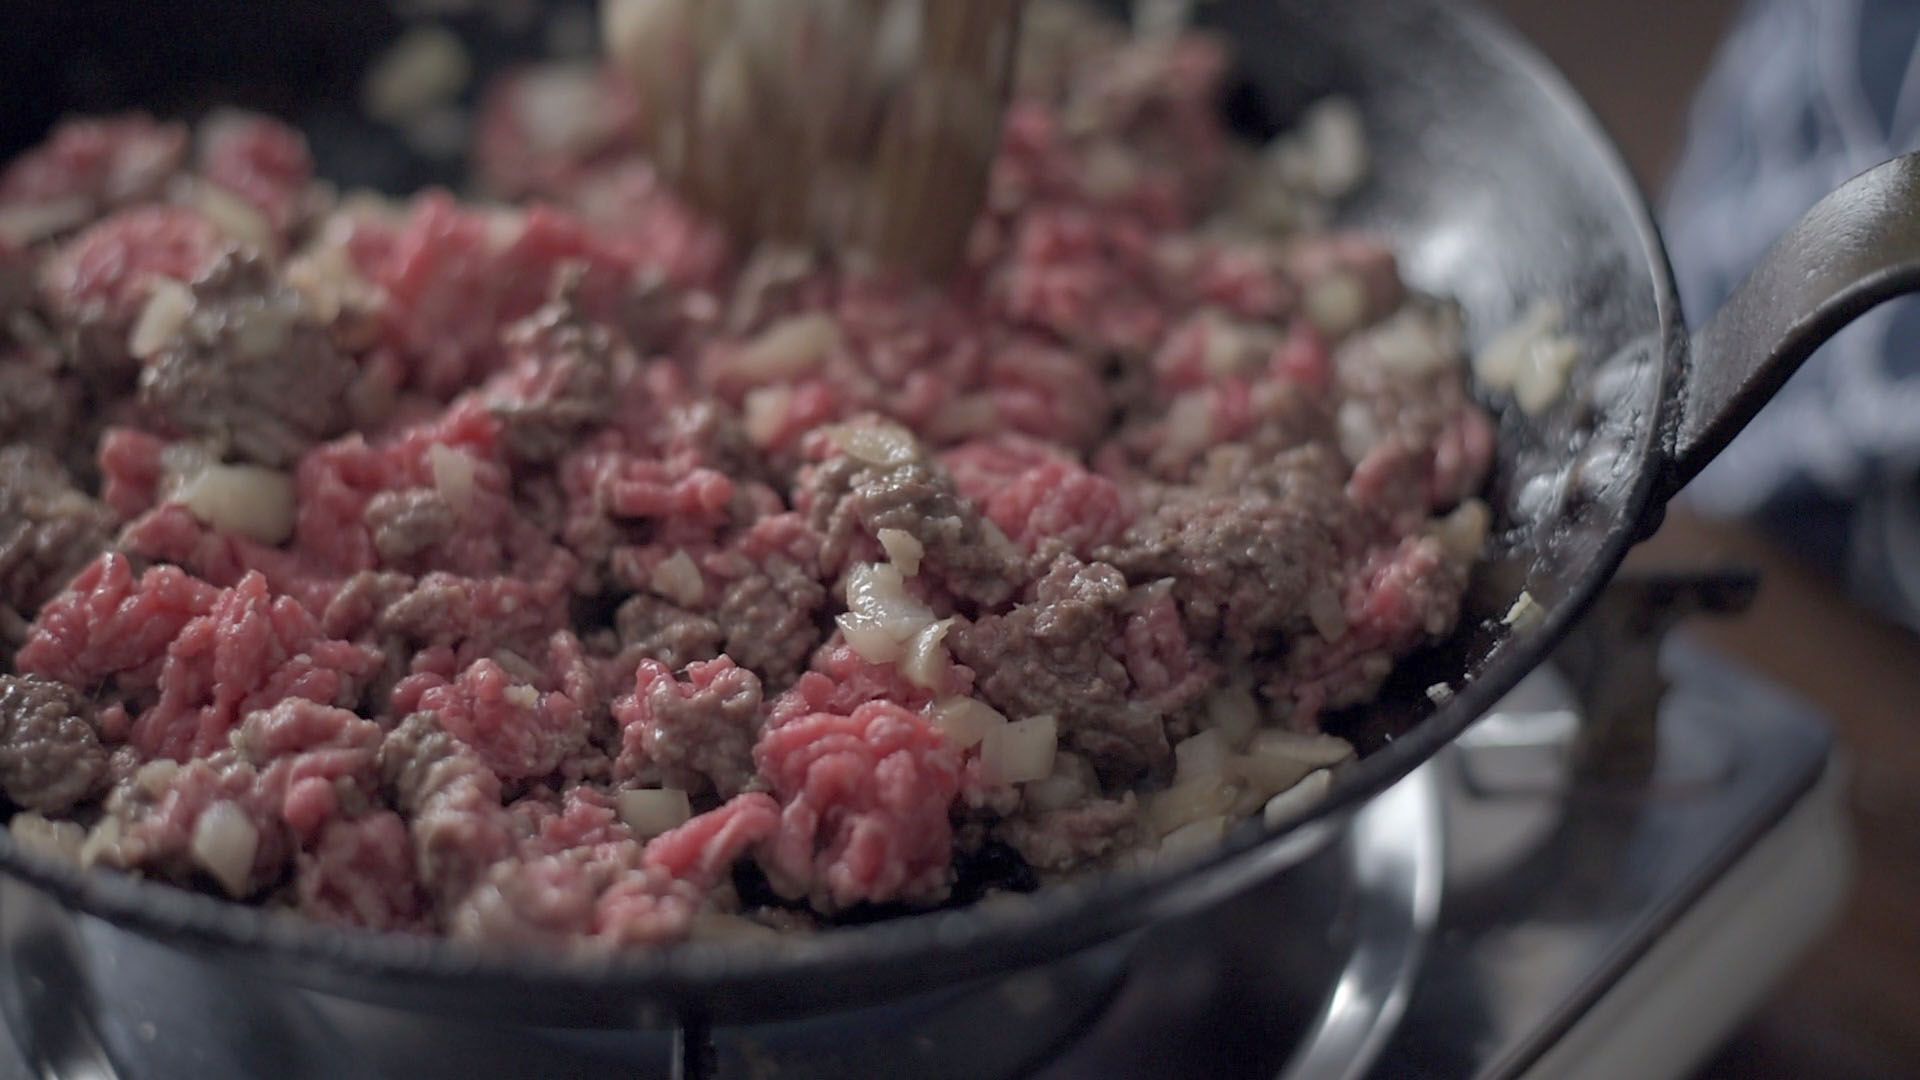 A pound of ground beef is added to the skillet to cook.